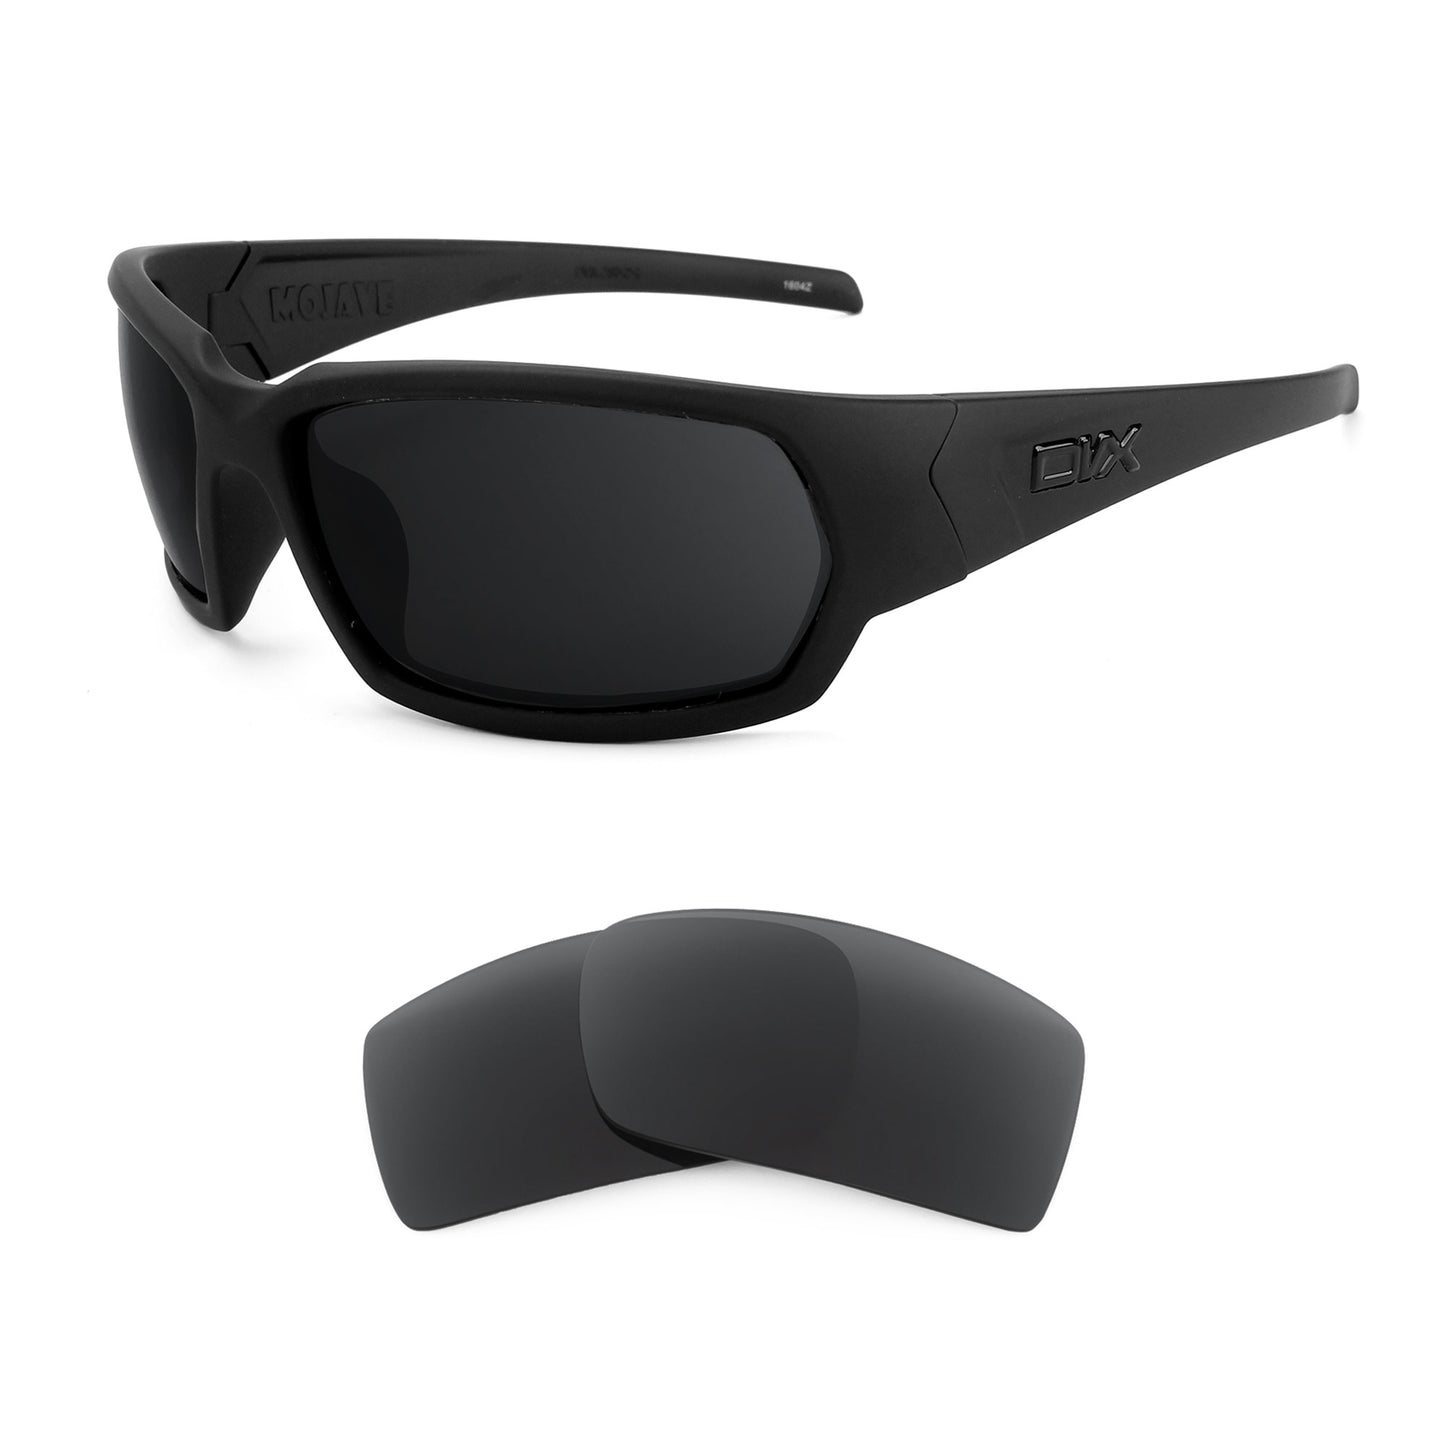 DVX Eyewear Mojave sunglasses with replacement lenses